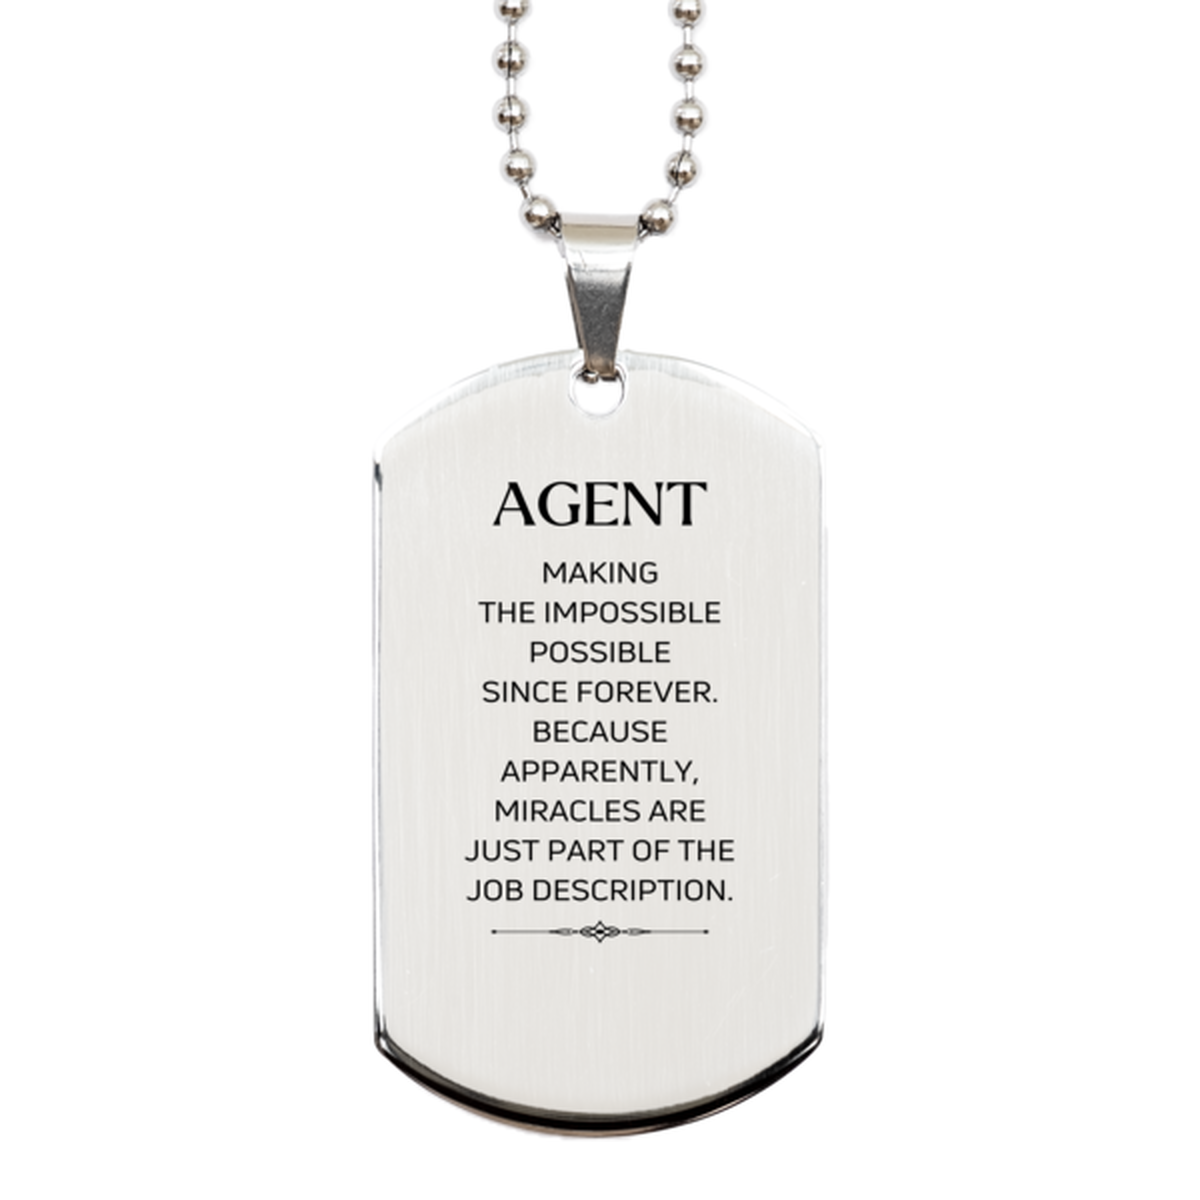 Funny Agent Gifts, Miracles are just part of the job description, Inspirational Birthday Silver Dog Tag For Agent, Men, Women, Coworkers, Friends, Boss